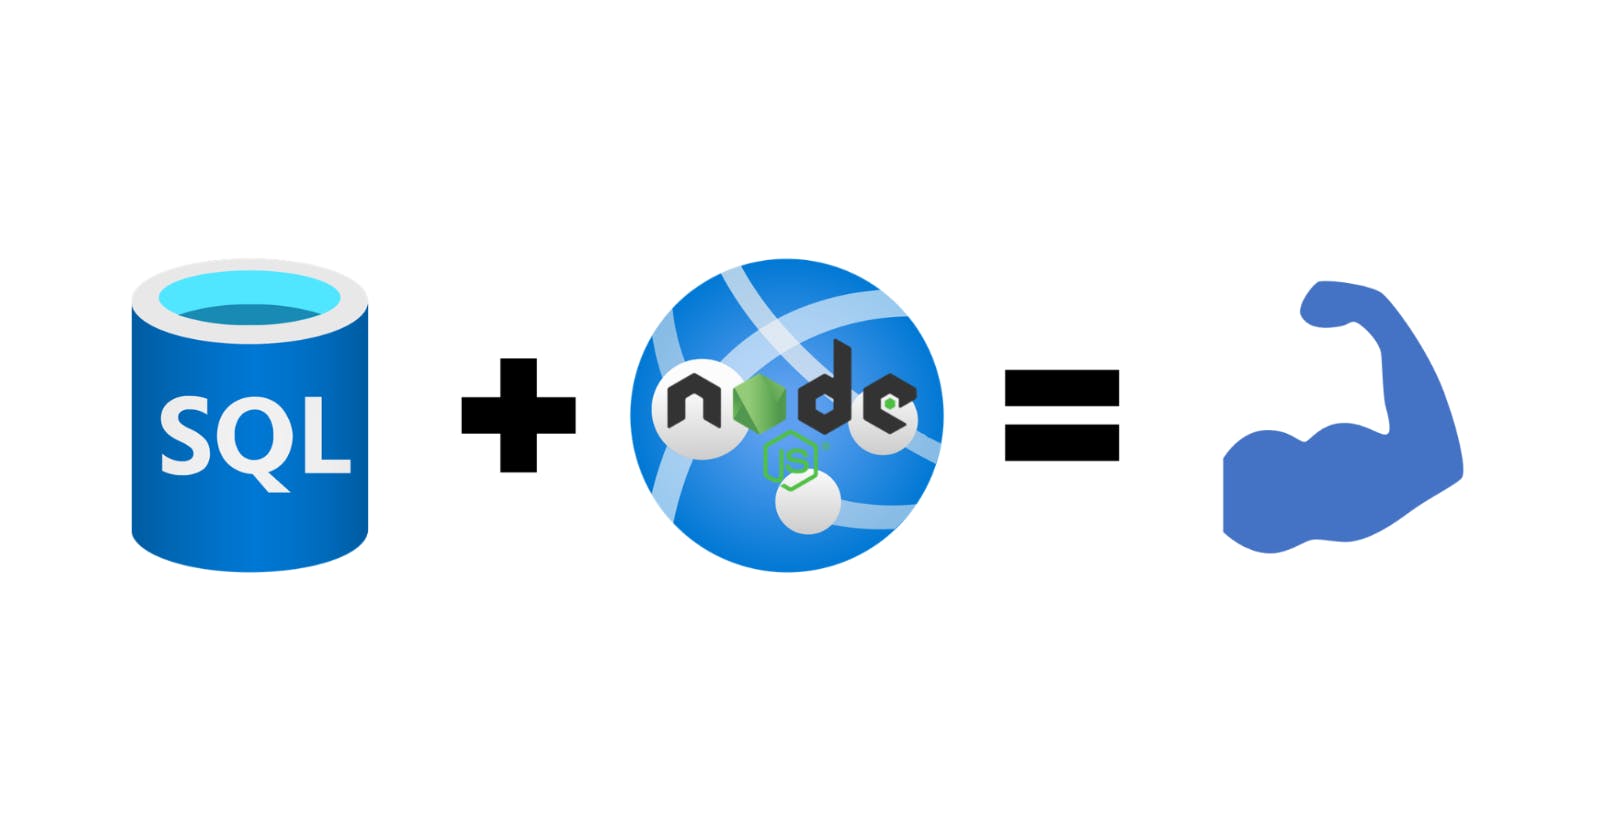 How to connect (and stay connected) to Azure SQL Database using managed identities in Node.js - Part 2: Testing connection & handling token expiration